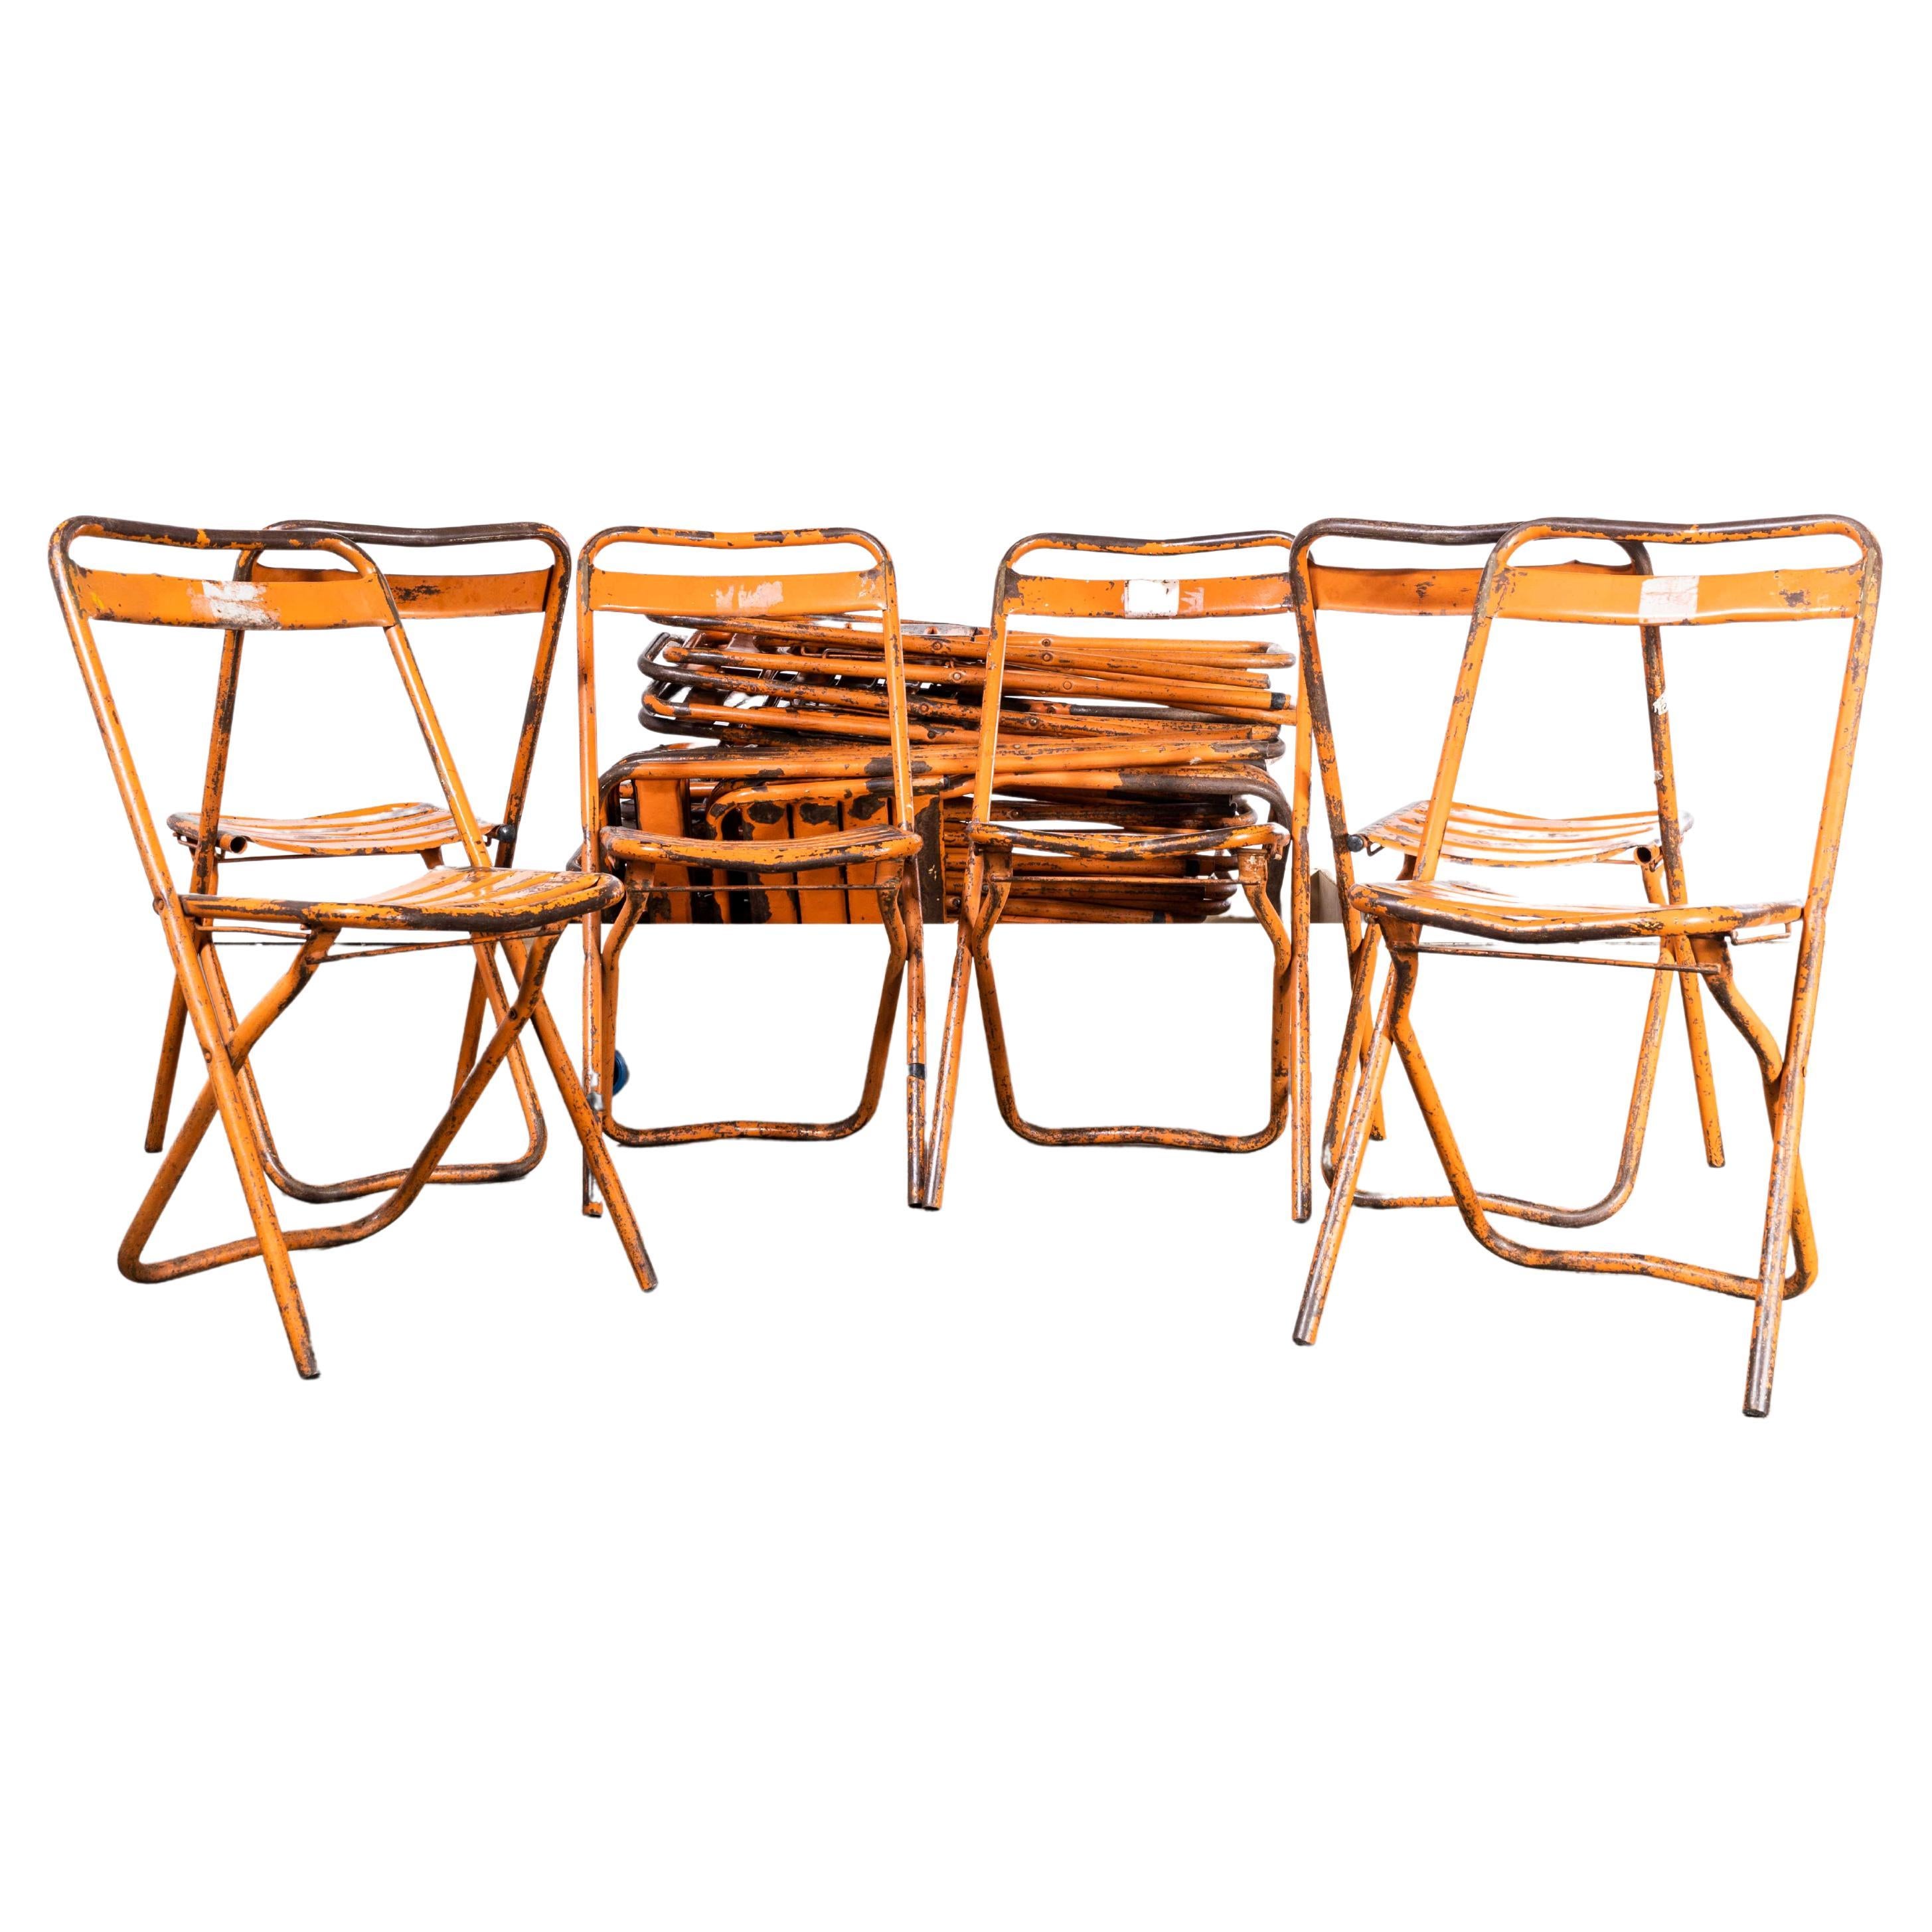 1950's Original Orange Tolix Folding Metal Outdoor Chairs - Various Qty For Sale